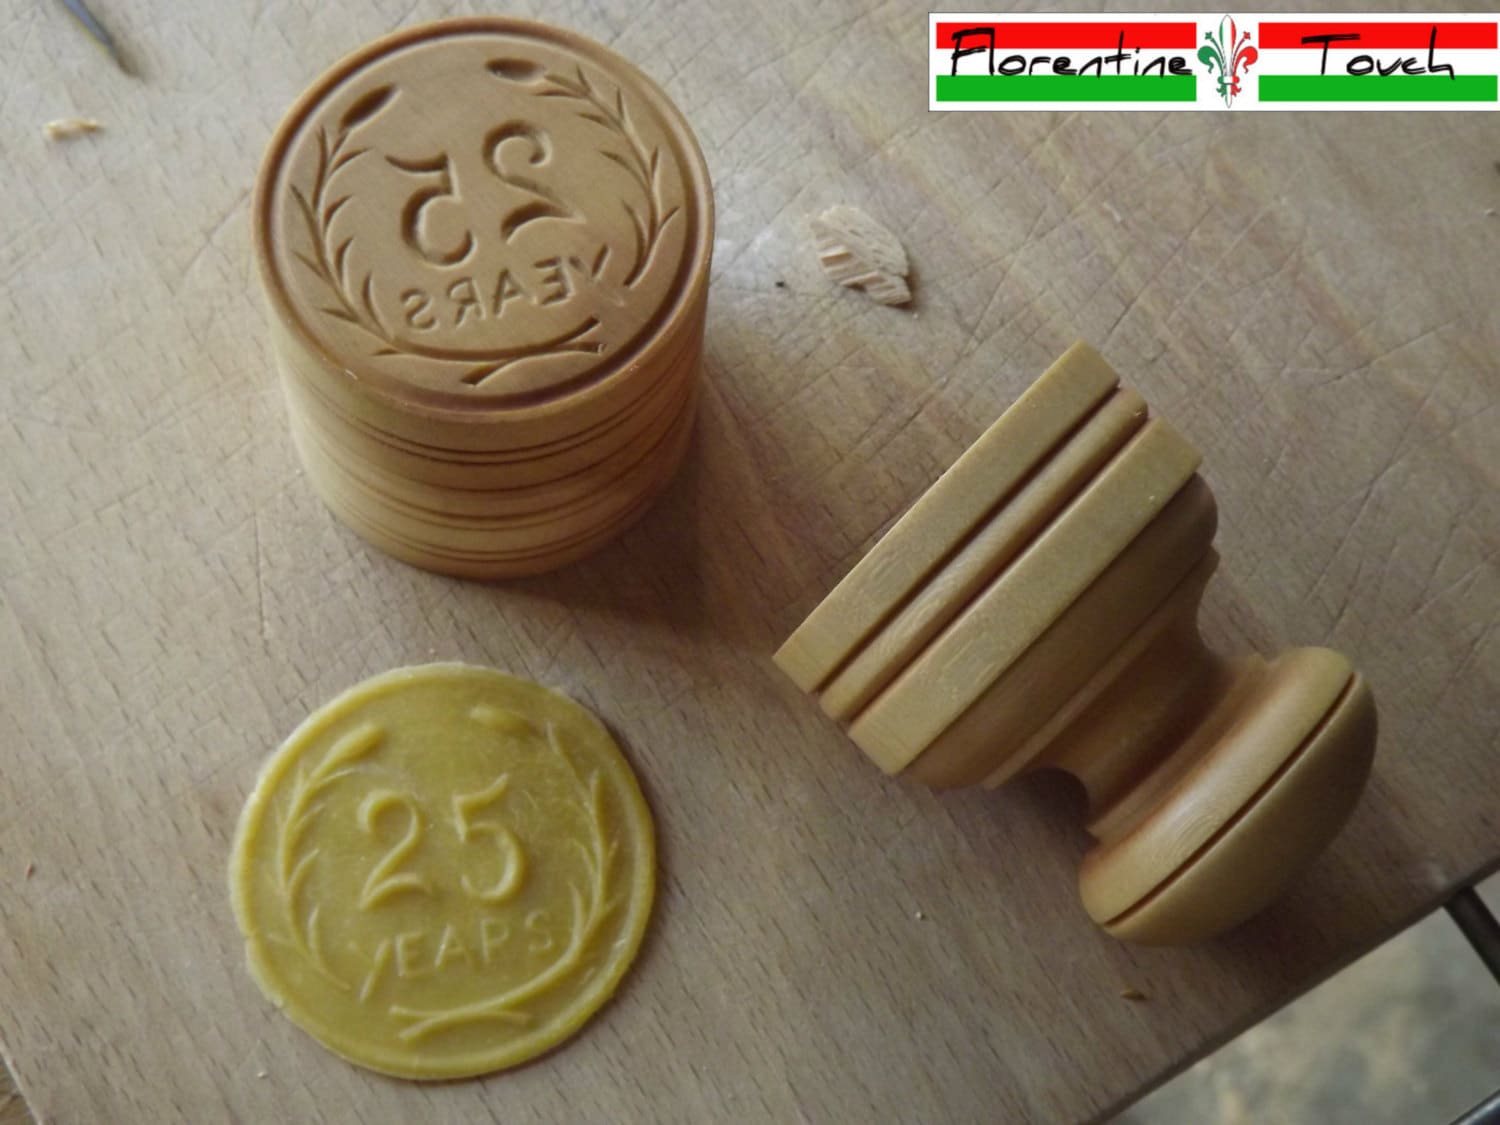 Made in Italy - Corzetti mould, orris shaped